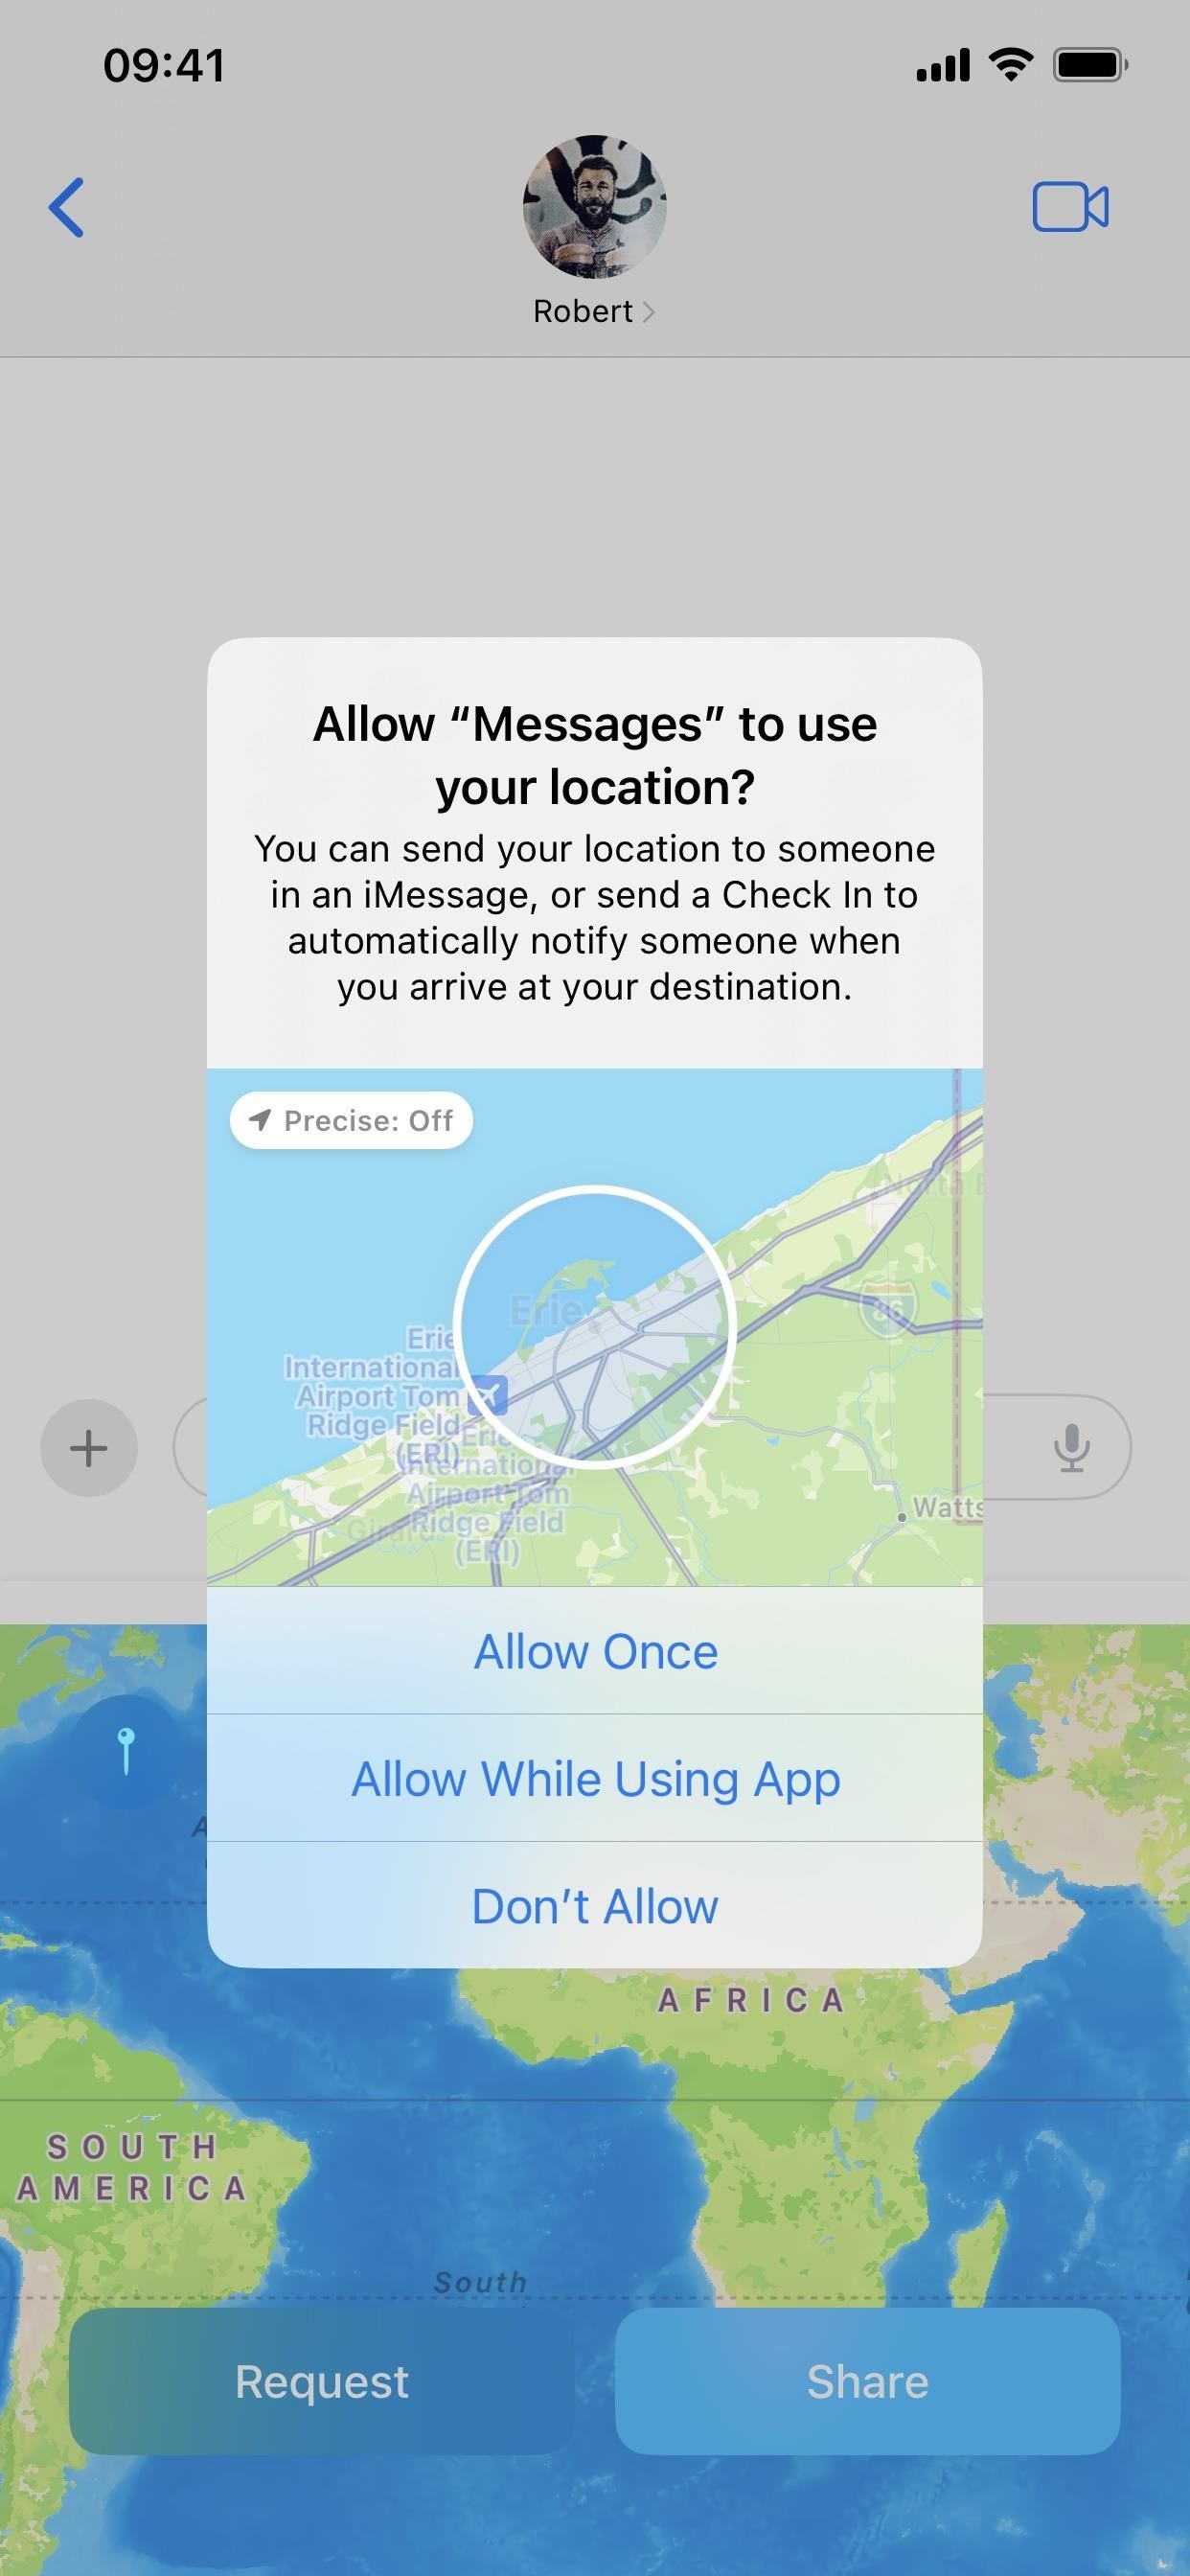 12 Things That'll Make Messaging on Your iPhone a Whole Lot Better